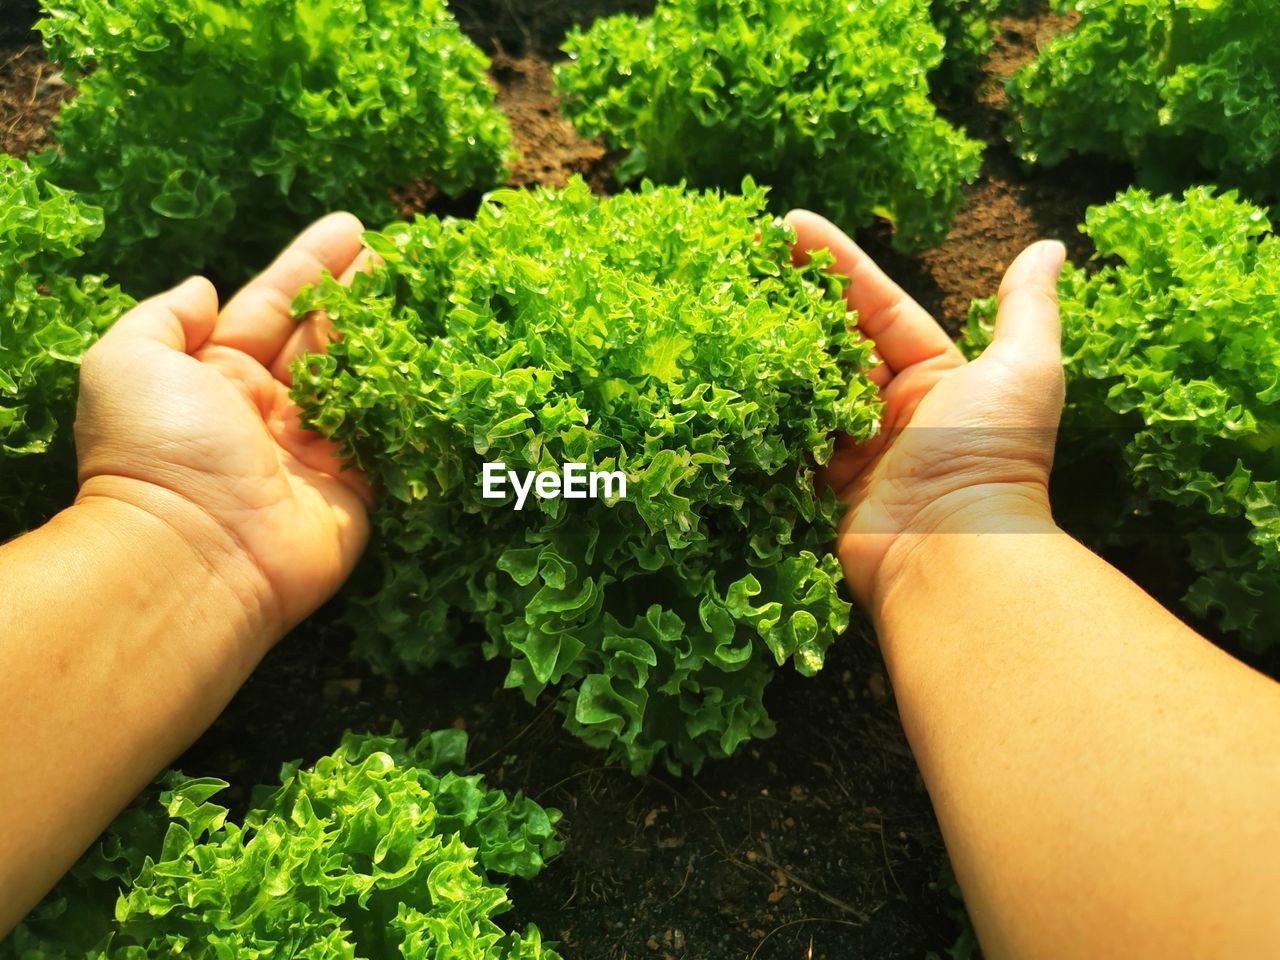 CROPPED IMAGE OF PERSON HAND HOLDING FRESH GREEN PLANTS